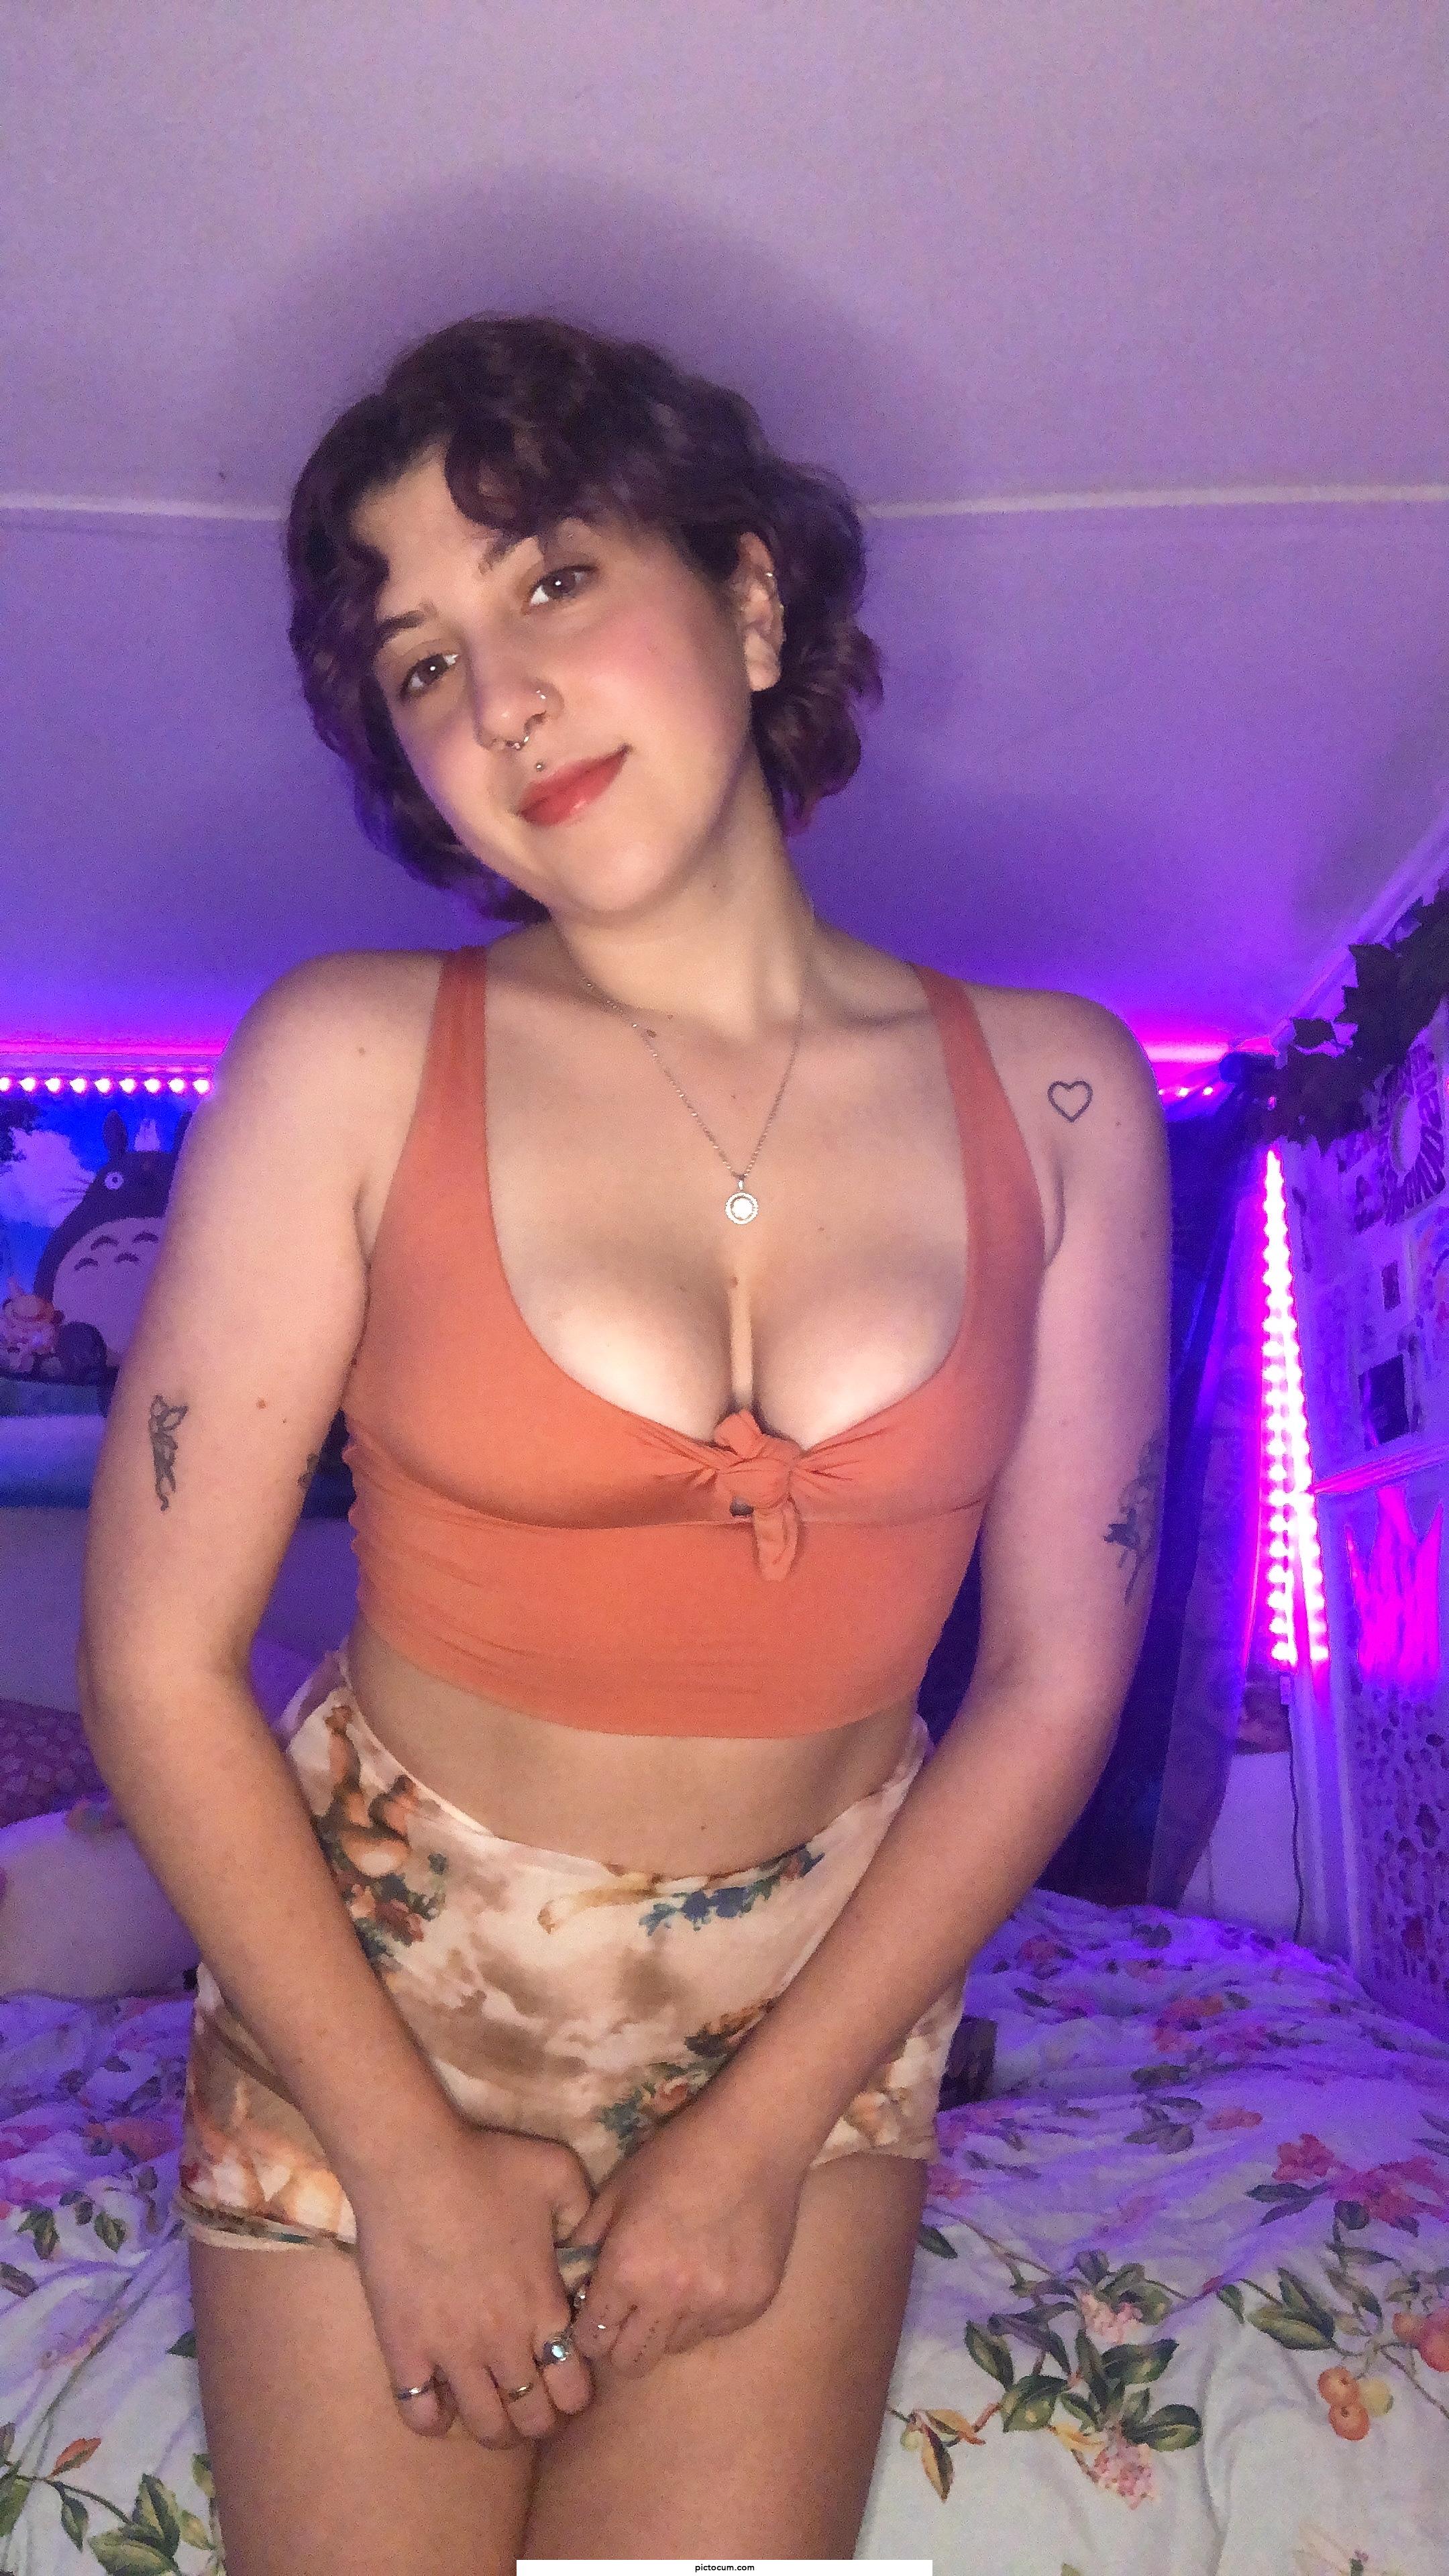 Now online and fuckable